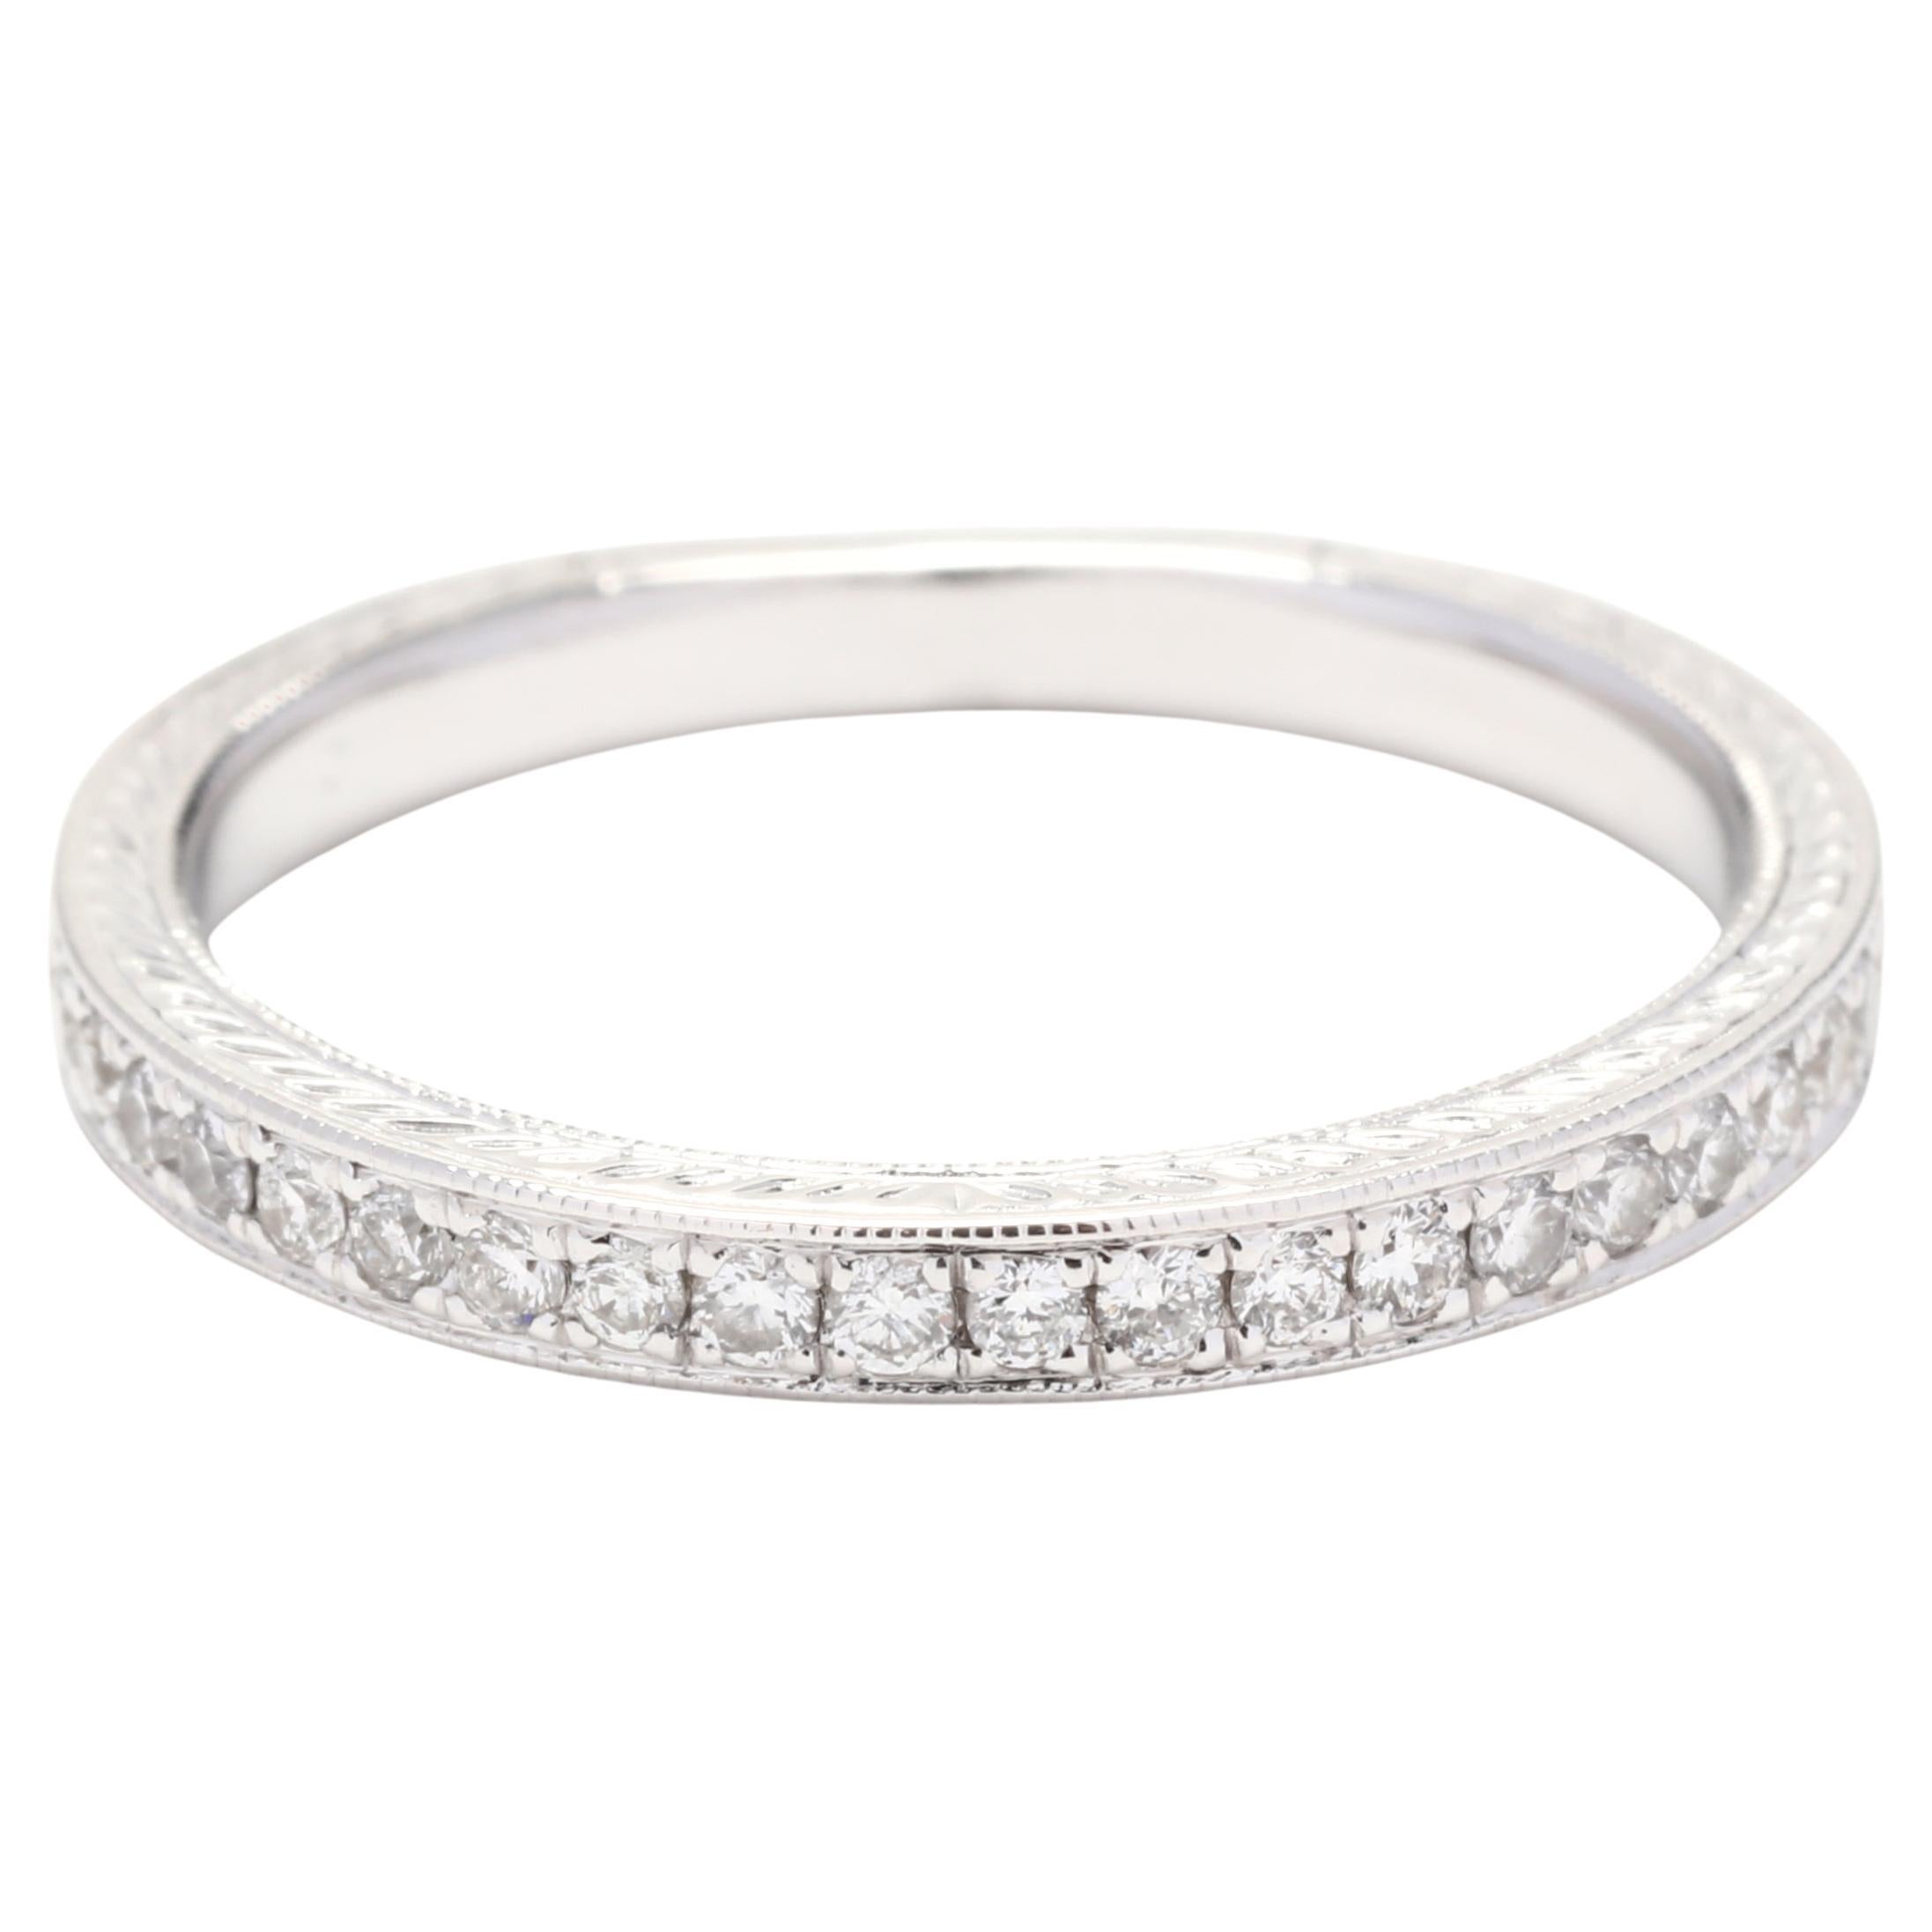 Engraved Diamond Wedding Band, 14K White Gold, Ring Size 6.25, Stackable Diamond For Sale